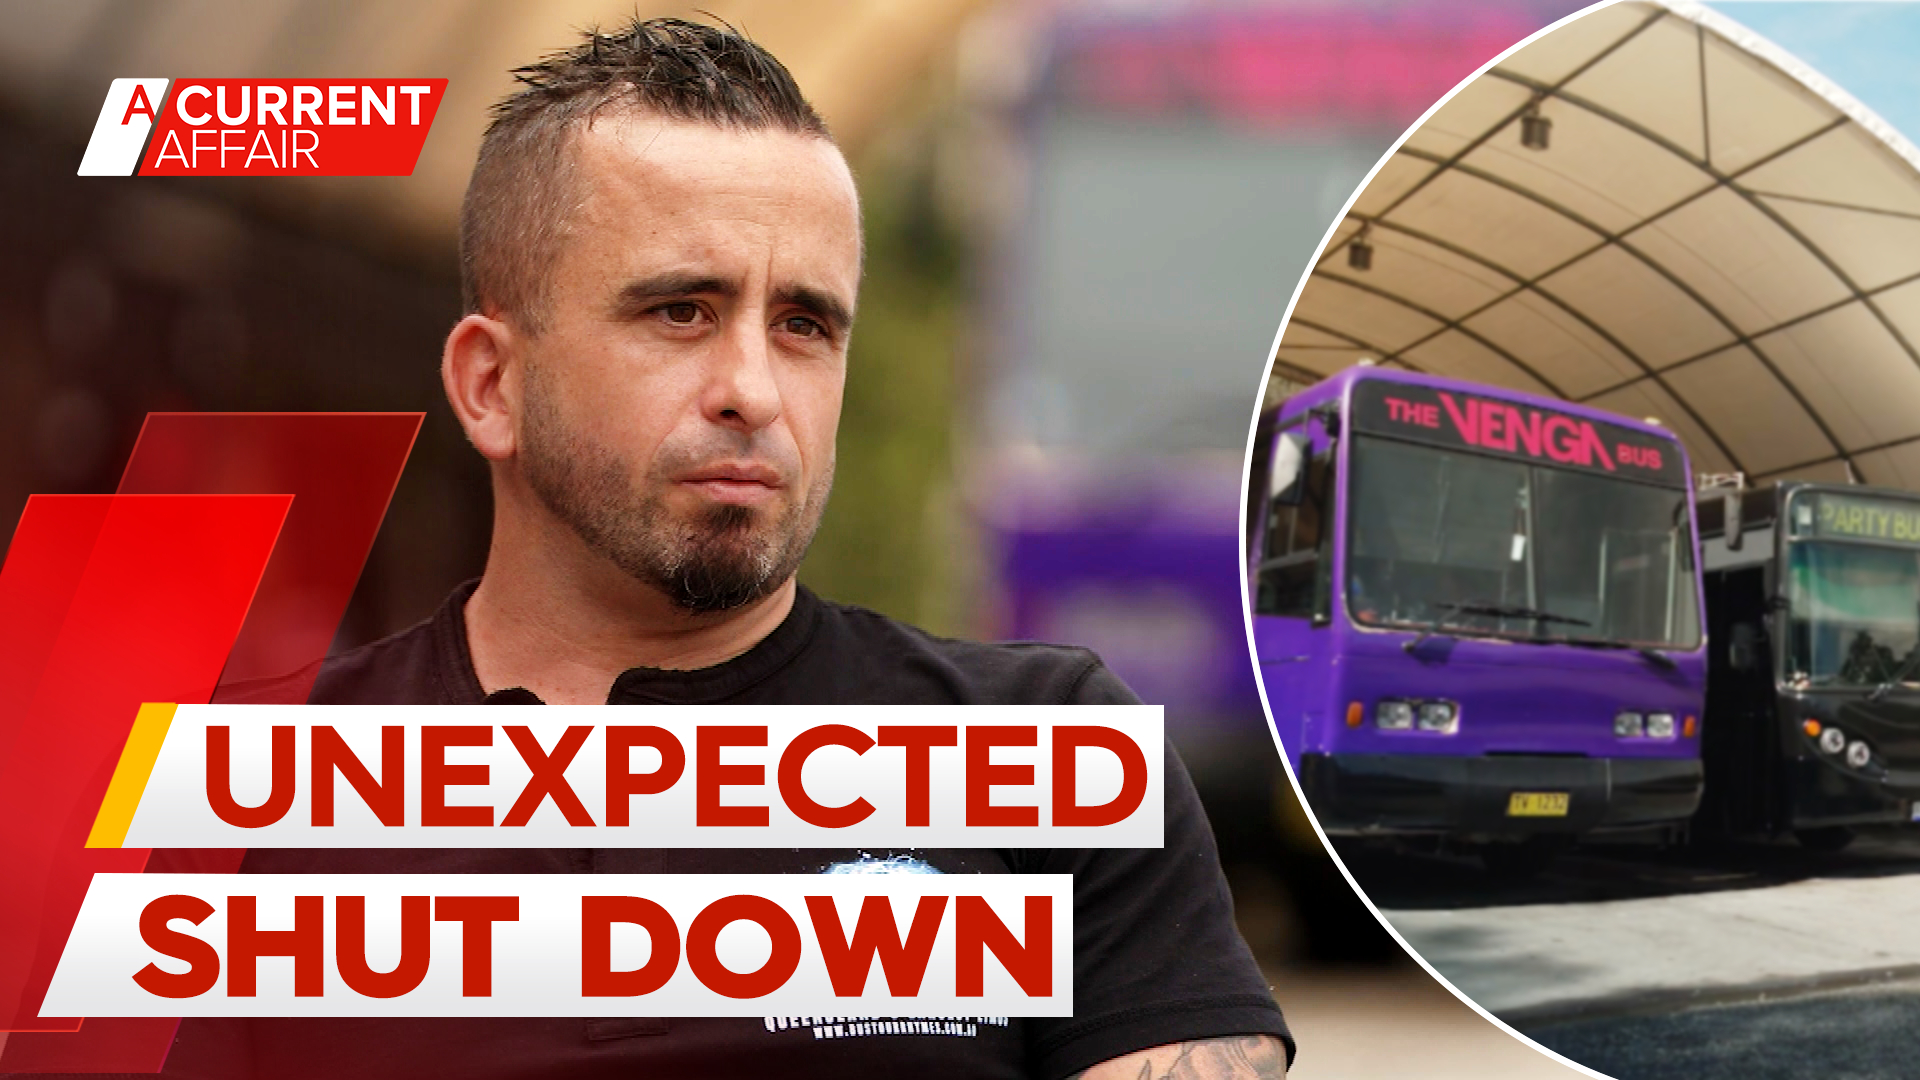 Party bus business could be shut down despite not receiving any complaints